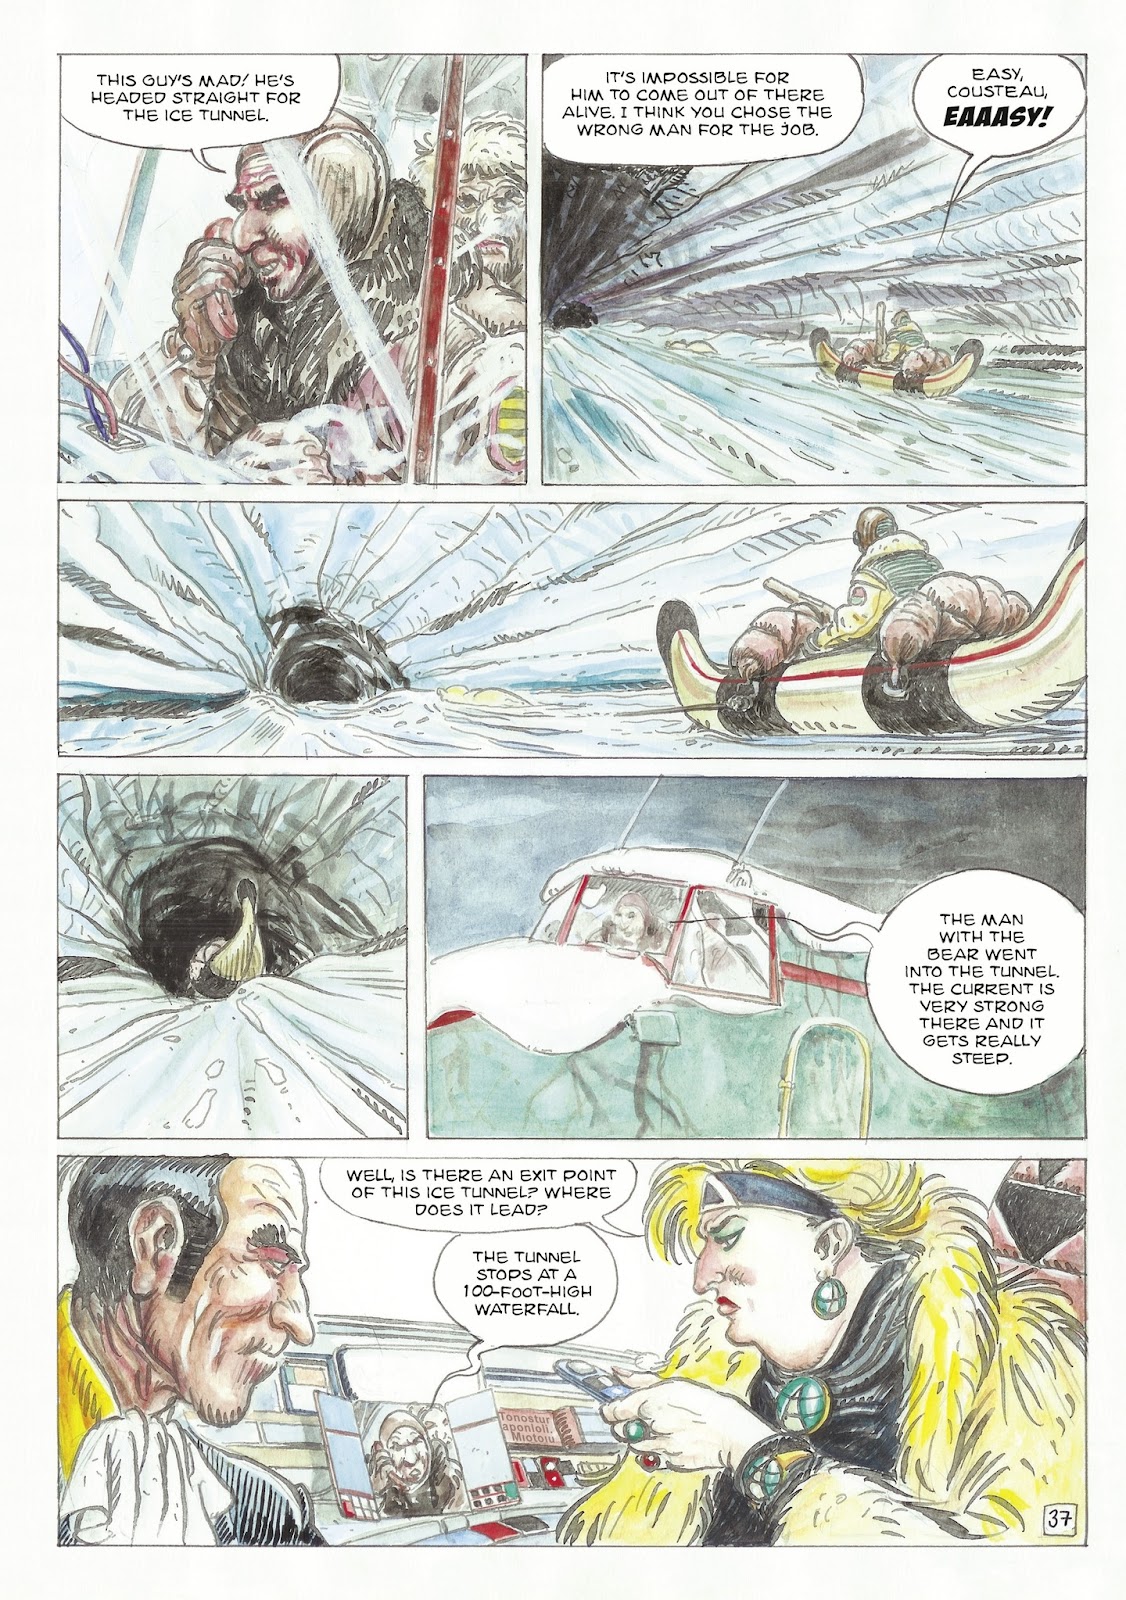 The Man With the Bear issue 1 - Page 39